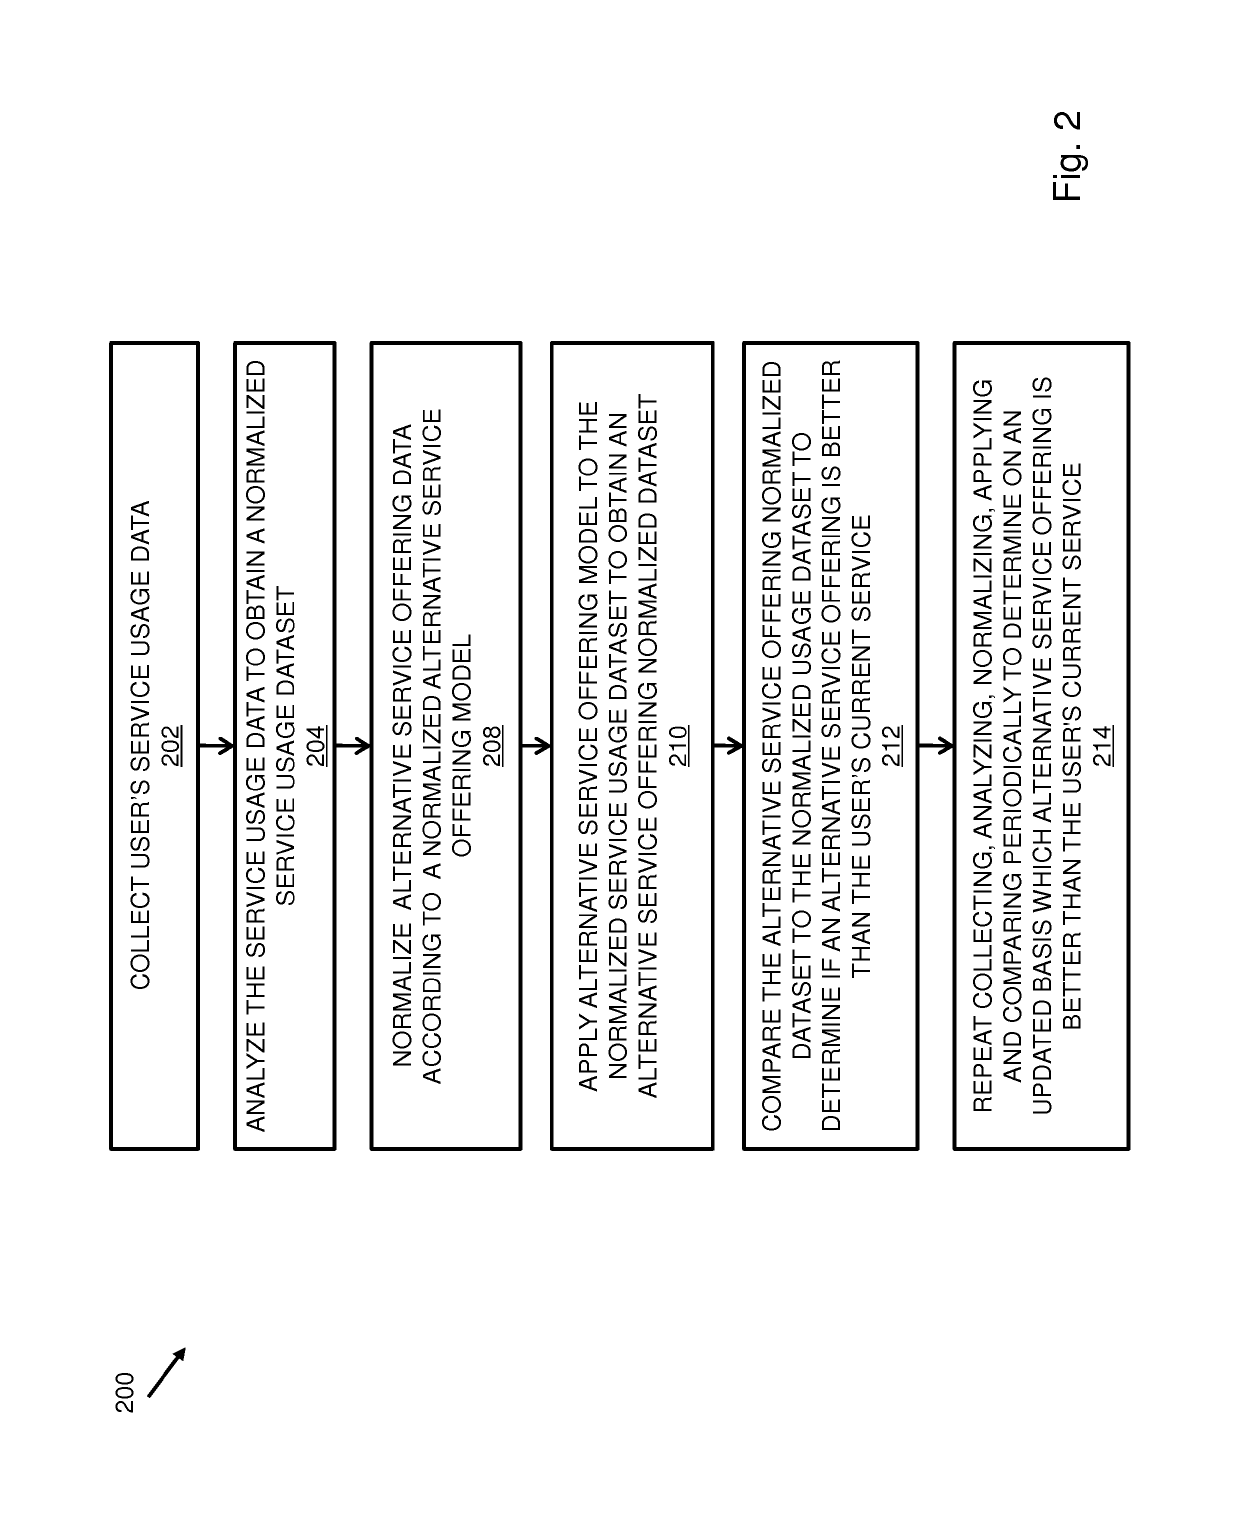 System and method of obtaining merchant sales information for marketing or sales teams